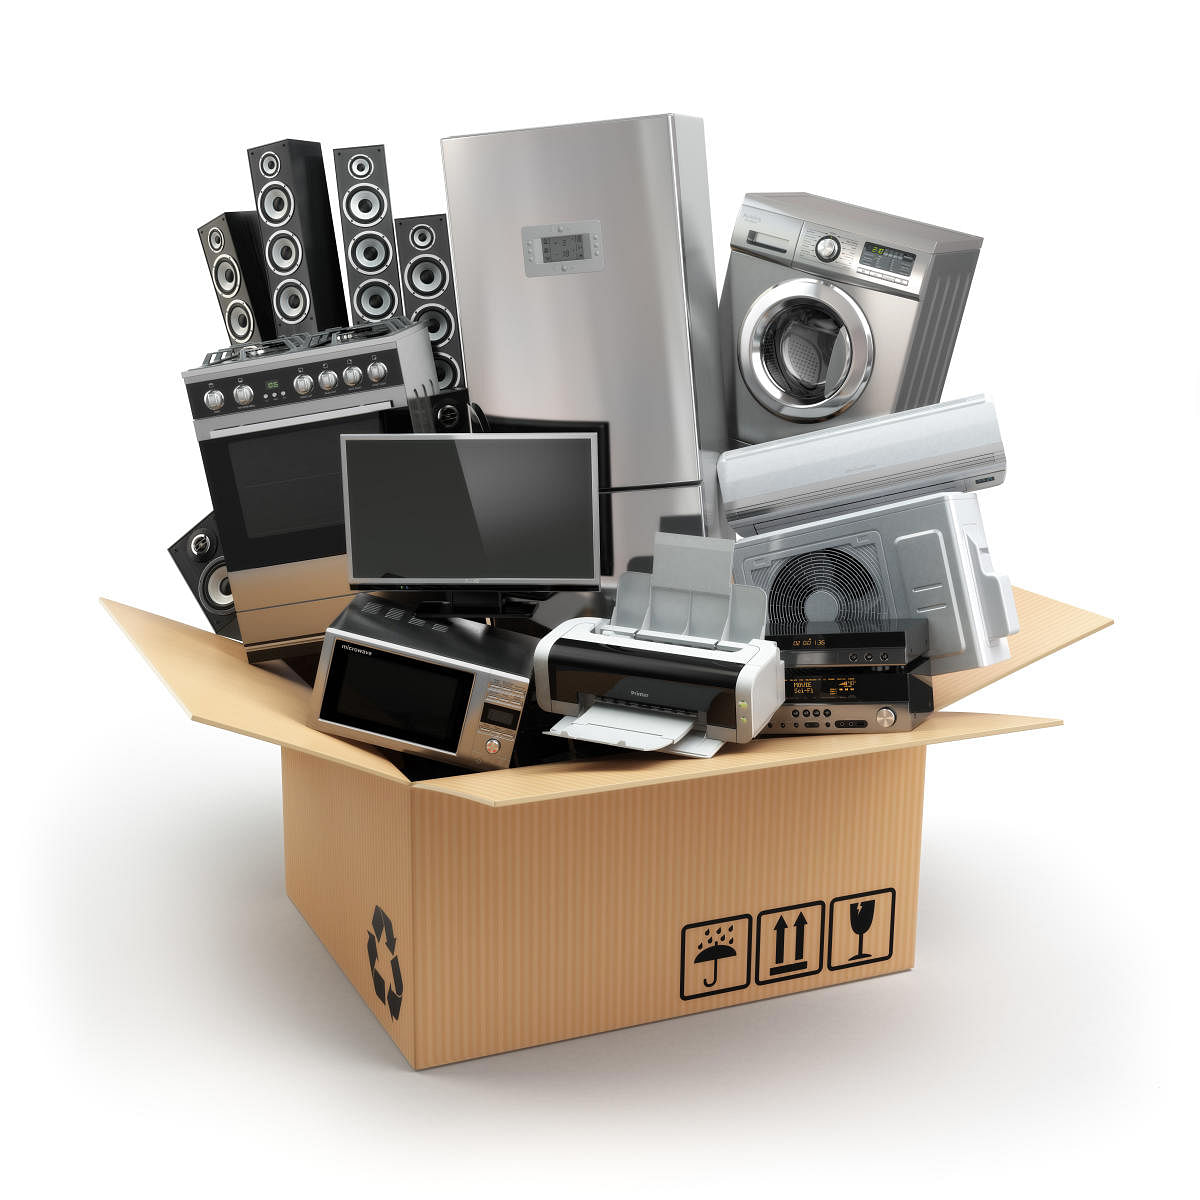 Smart packing saves space and ensures safety of the electronics.